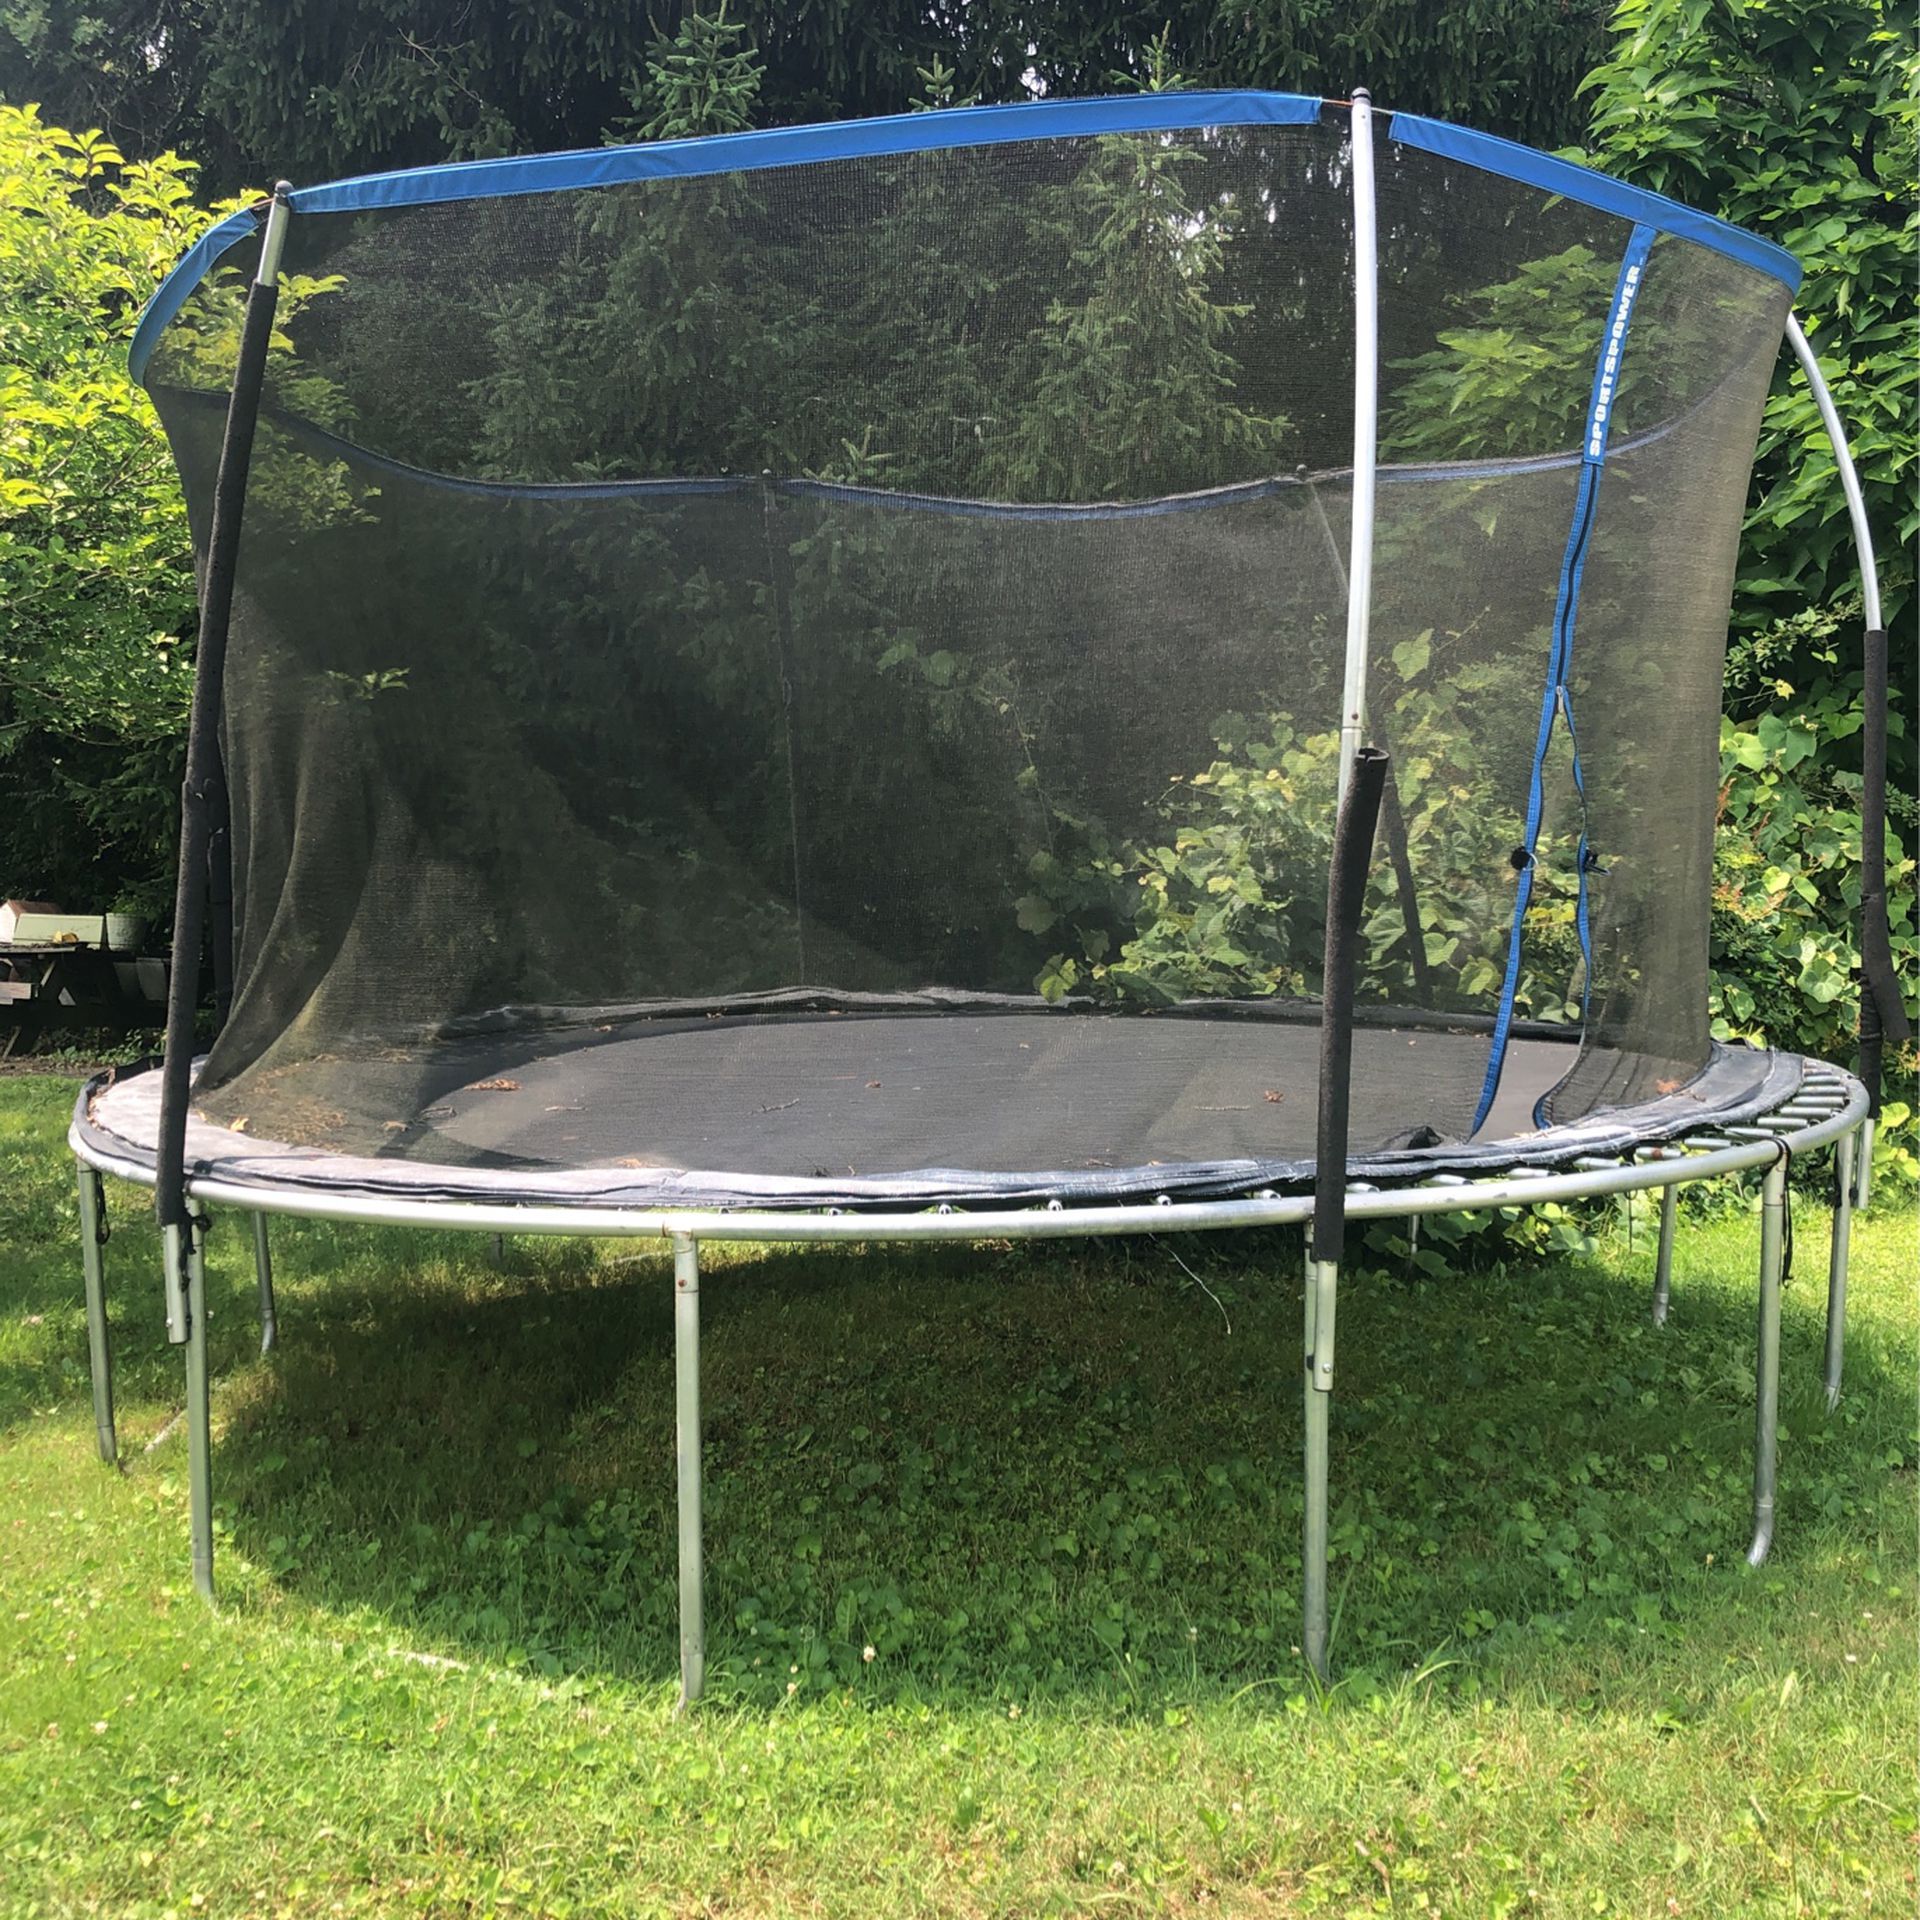 Trampoline with Safety Net $65